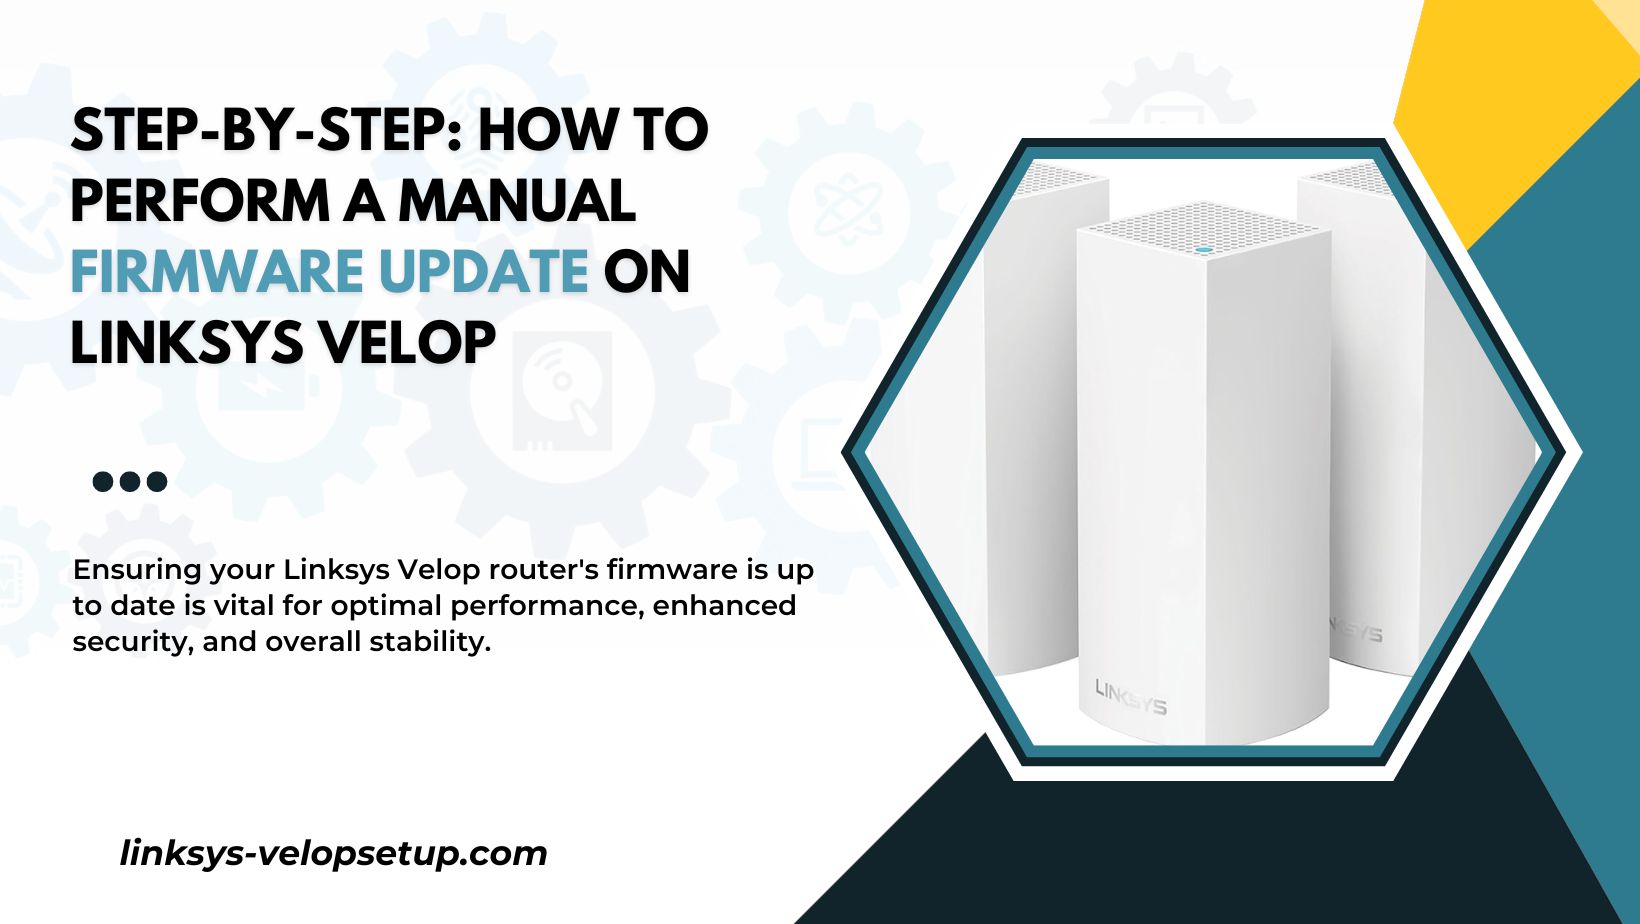 You are currently viewing Step-by-Step: How to Perform a Manual Firmware Update on Linksys Velop